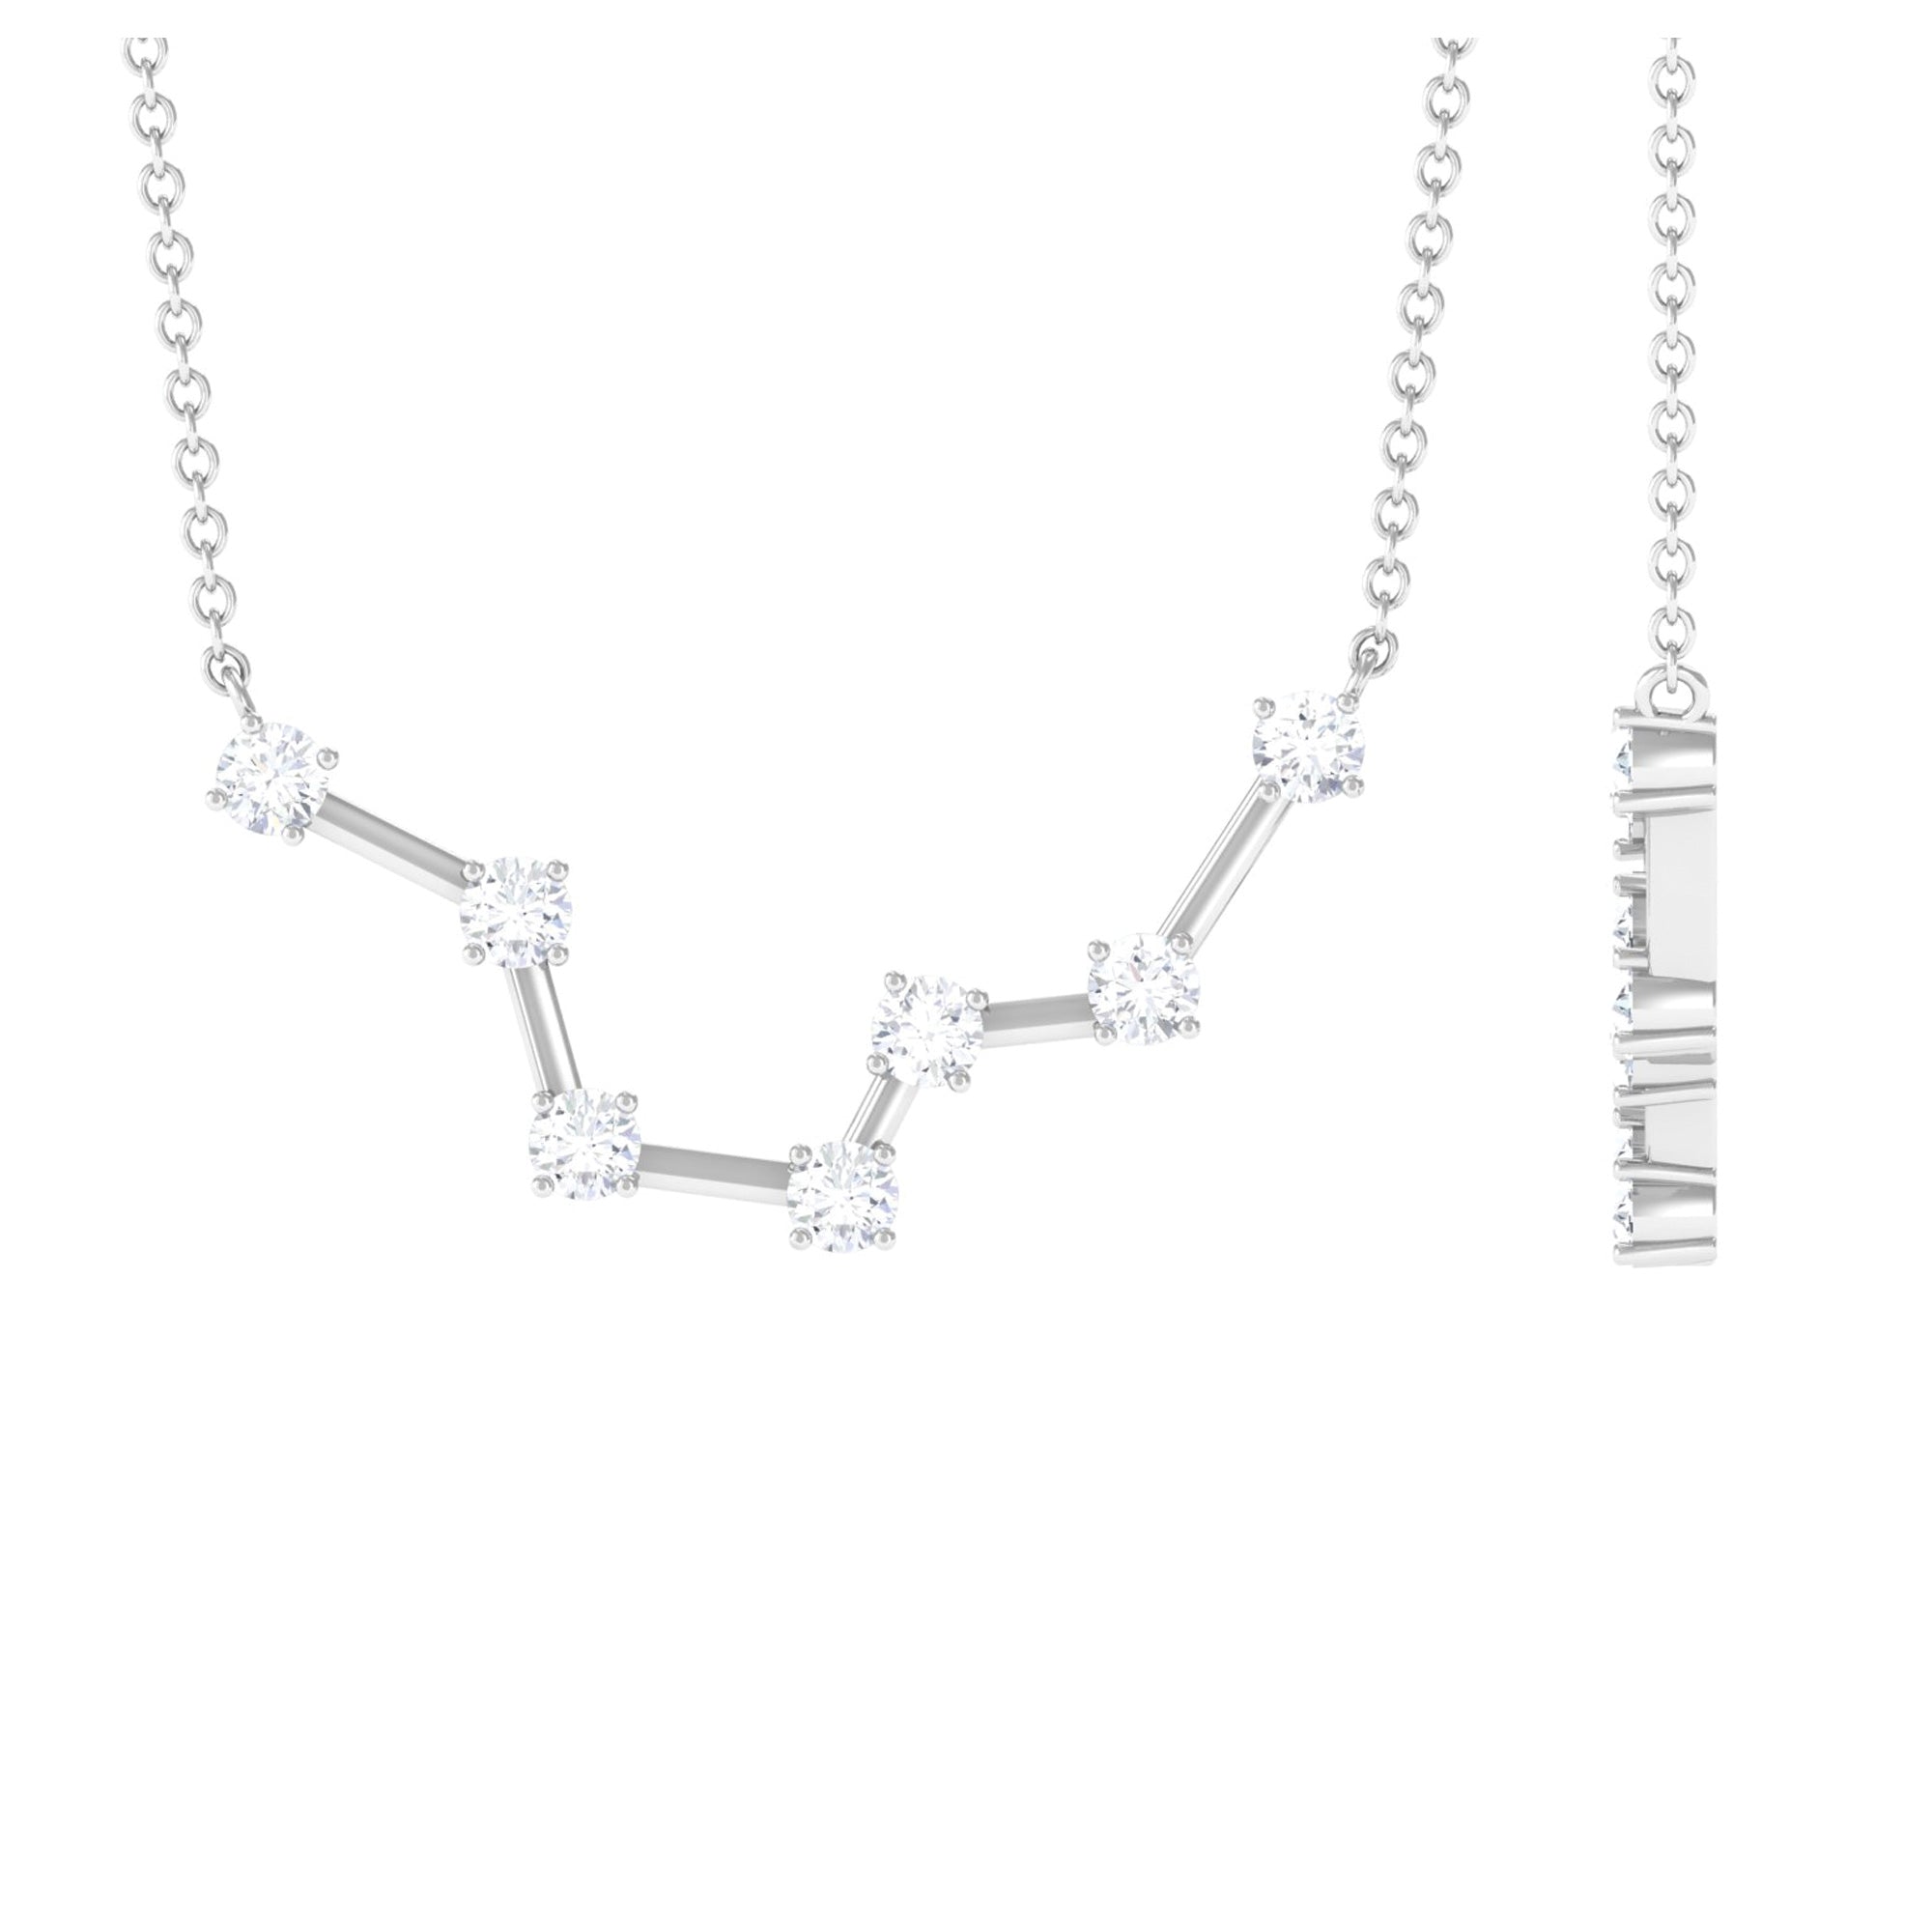 Certified Moissanite Pisces Zodiac Constellation Necklace - Rosec Jewels